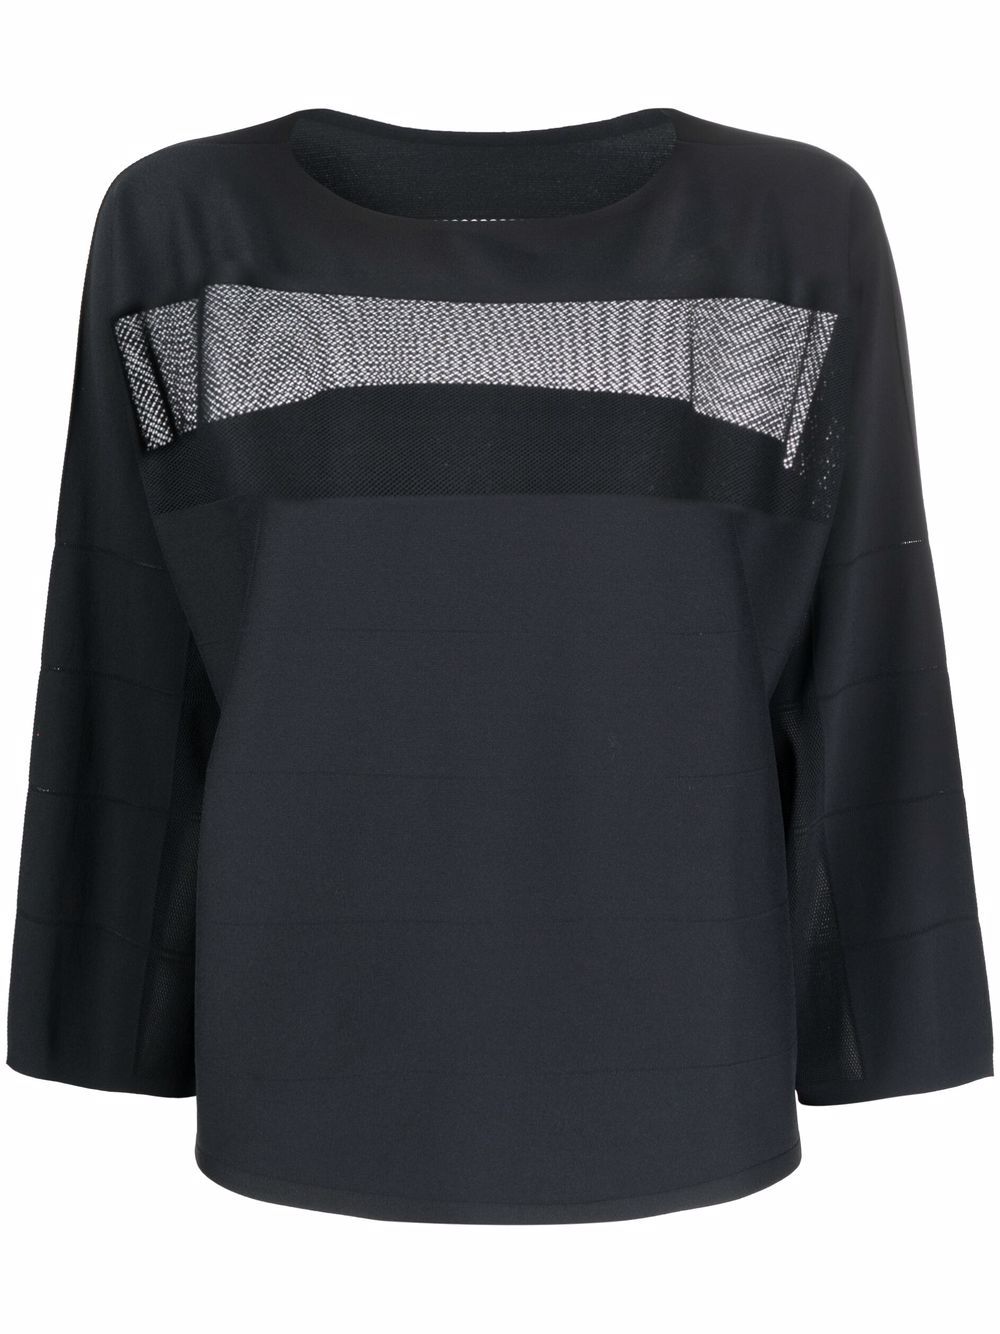 Pleats Please Issey Miyake Cropped-Bluse mit Netzeinsatz - Schwarz von Pleats Please Issey Miyake